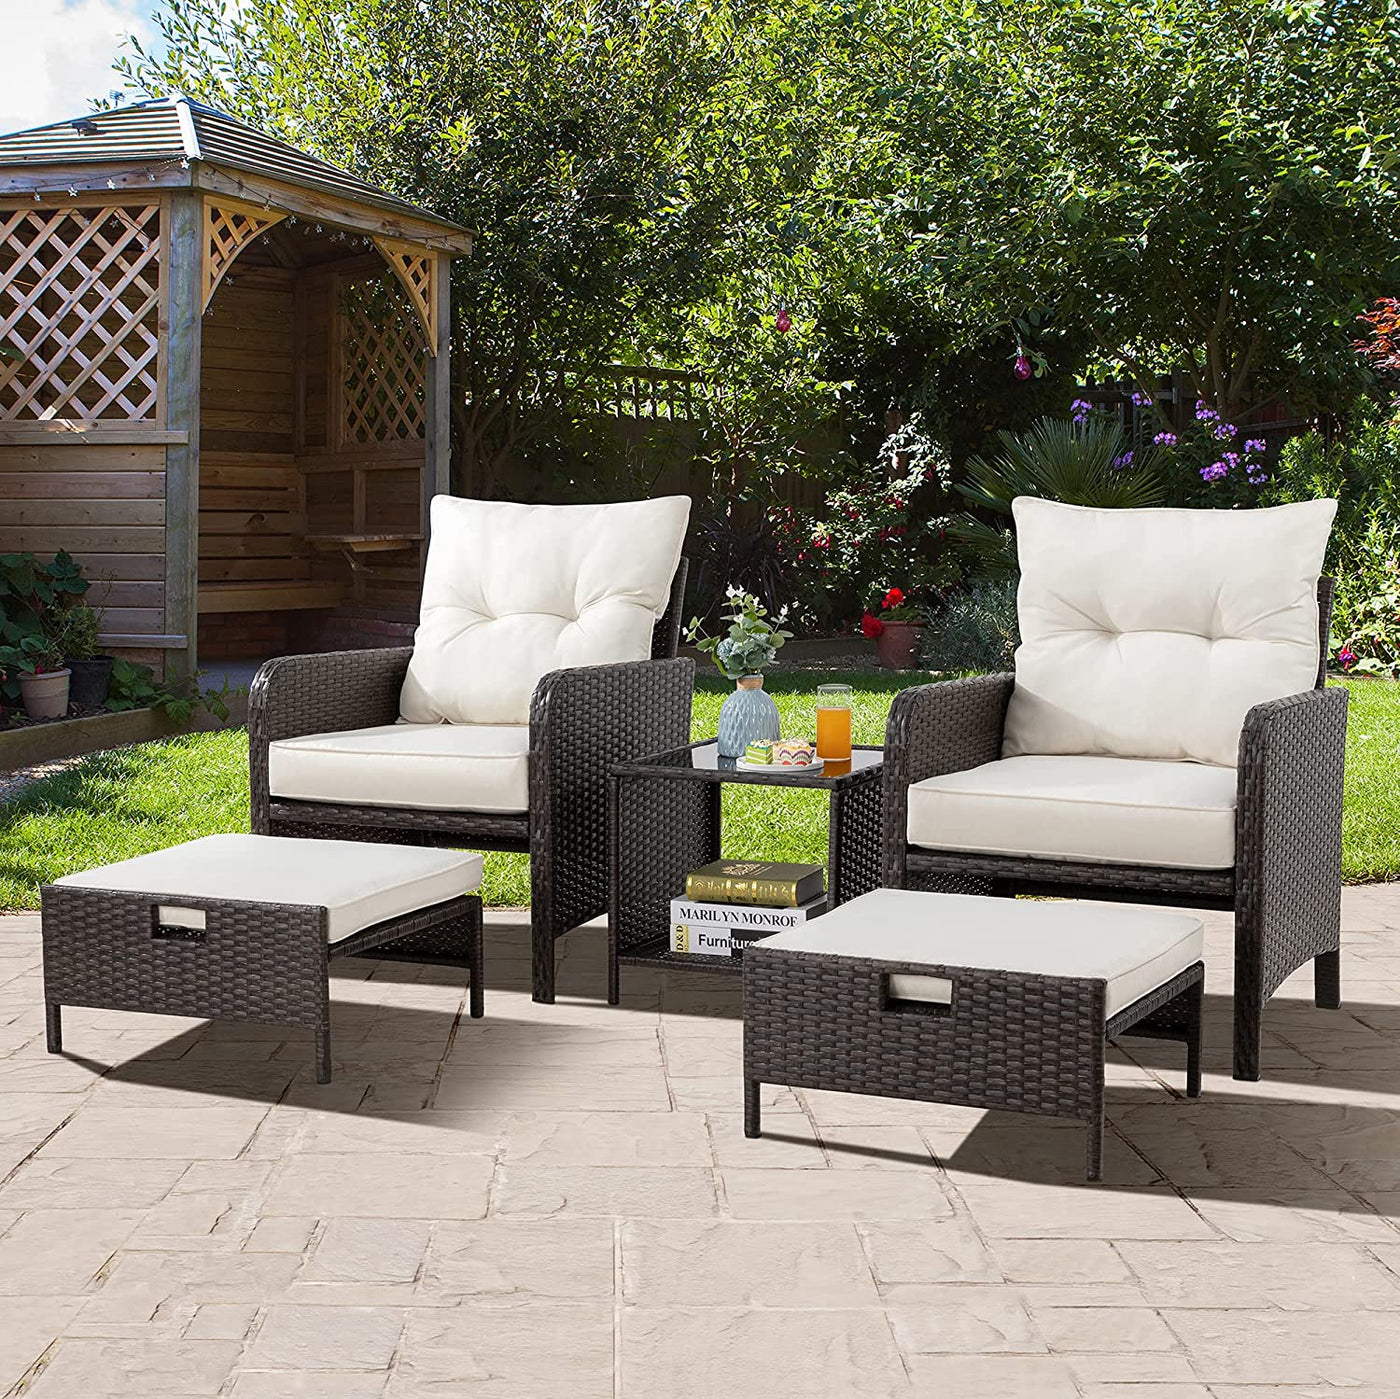 Walsunny 5 Piece Outdoor Recliner Conversation Set With Beige Cushions, Wicker PE Rattan